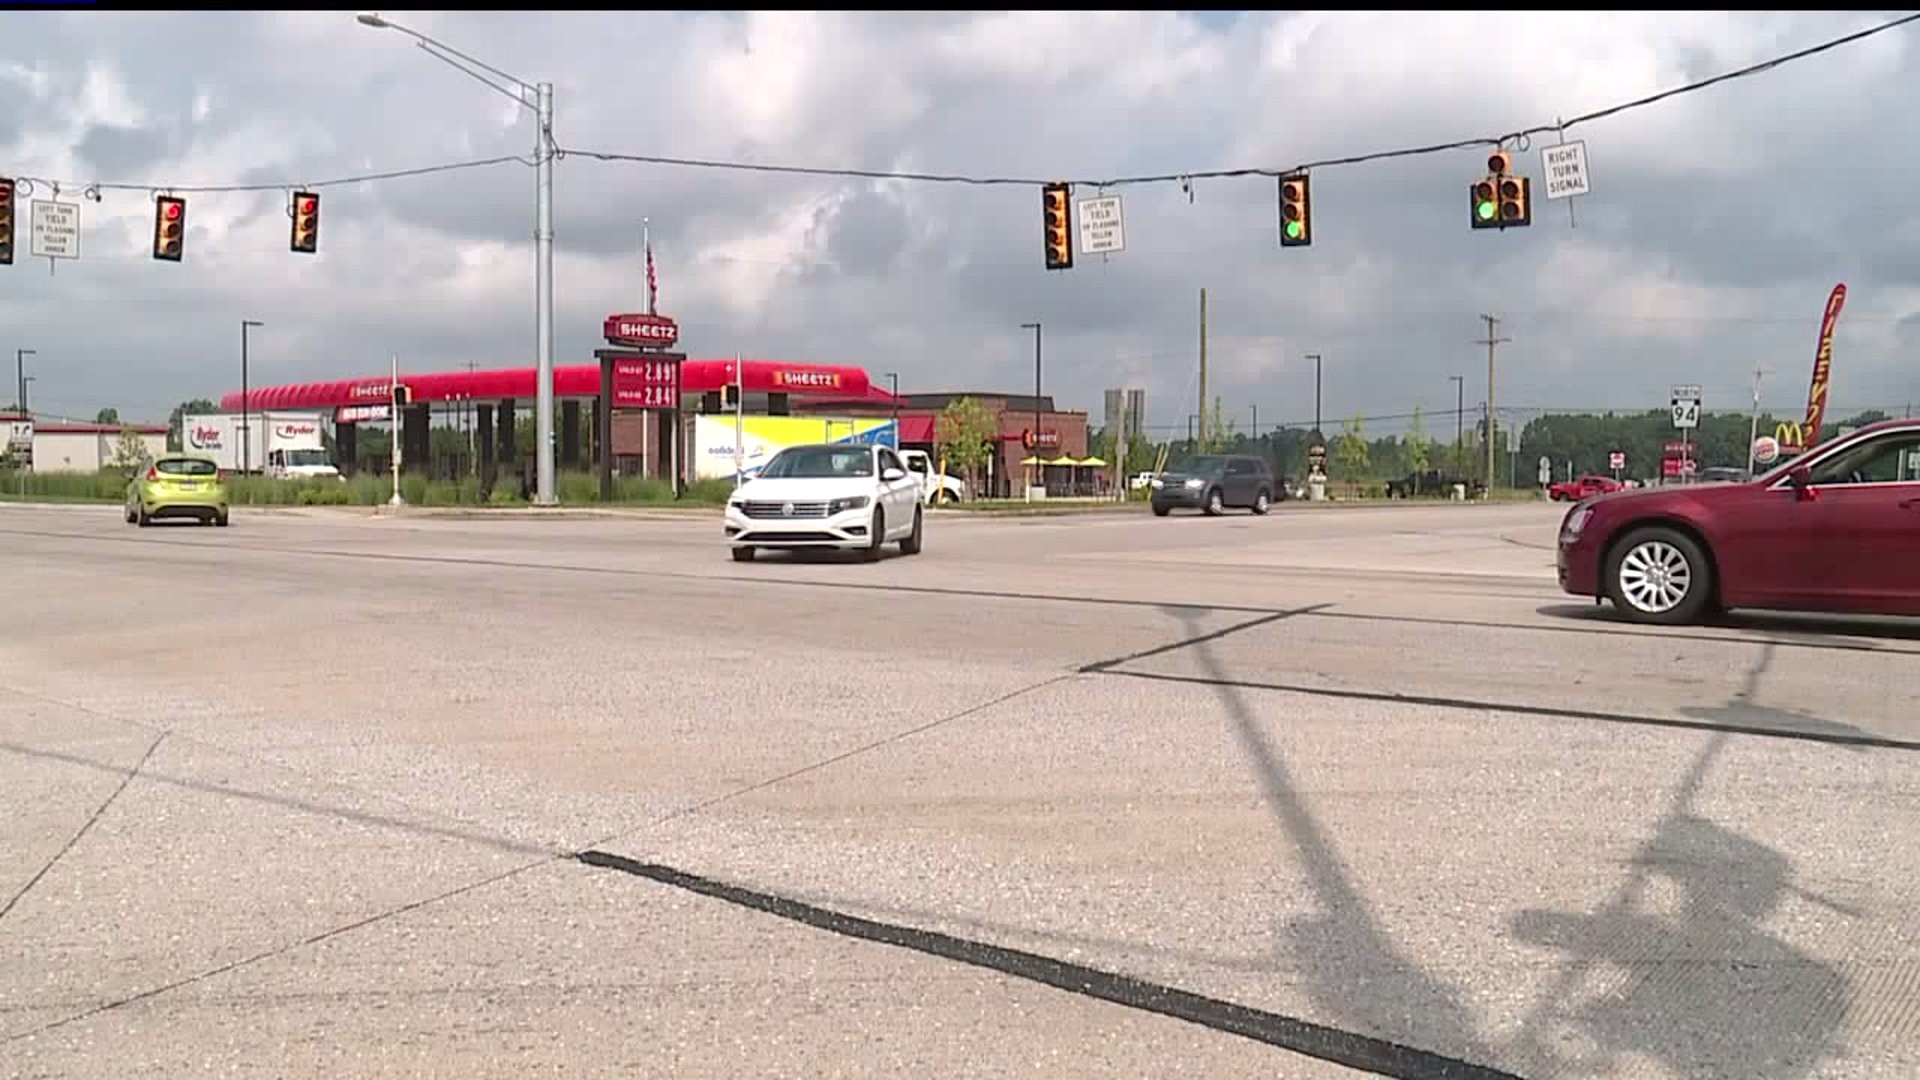 Reported traffic signal malfunction in Adams County